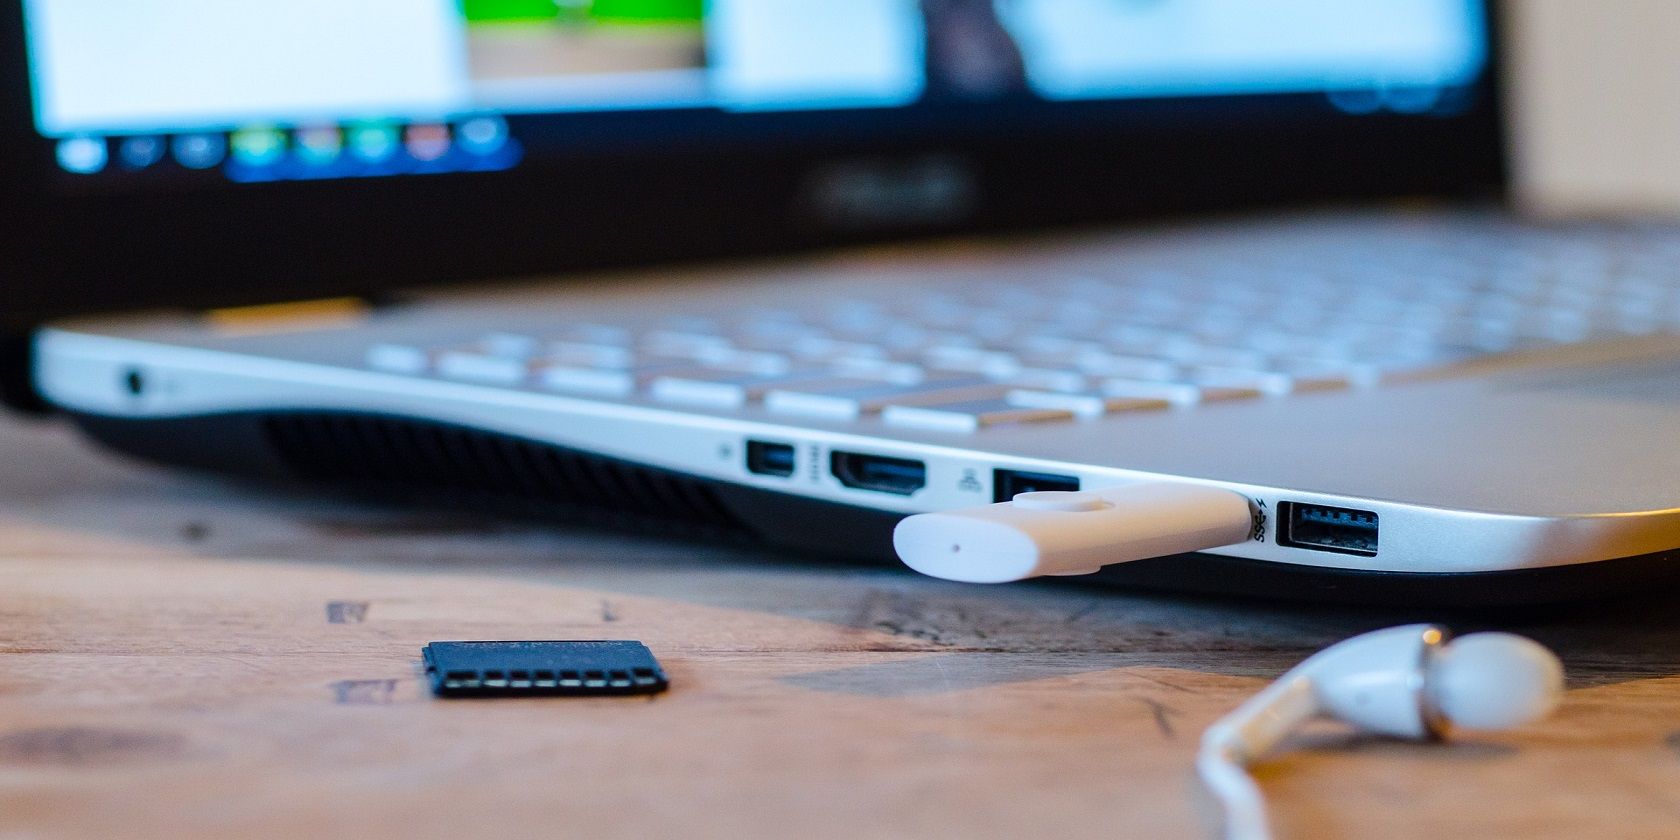 How to Create Windows 10 Bootable USB on Mac With or Without Bootcamp